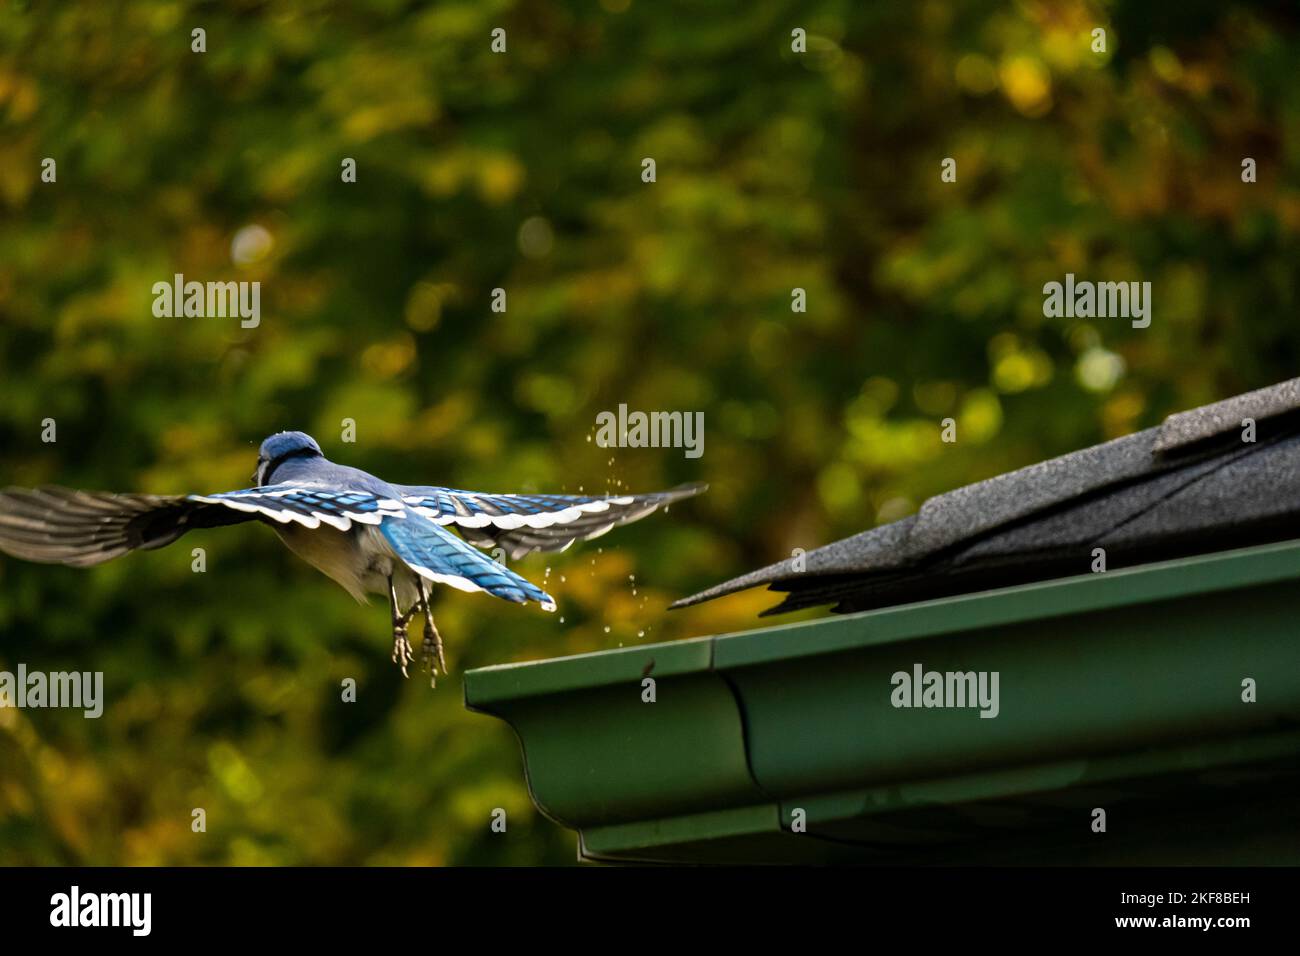 Blue jay taking off from the roof of a house kicking up water. Stock Photo